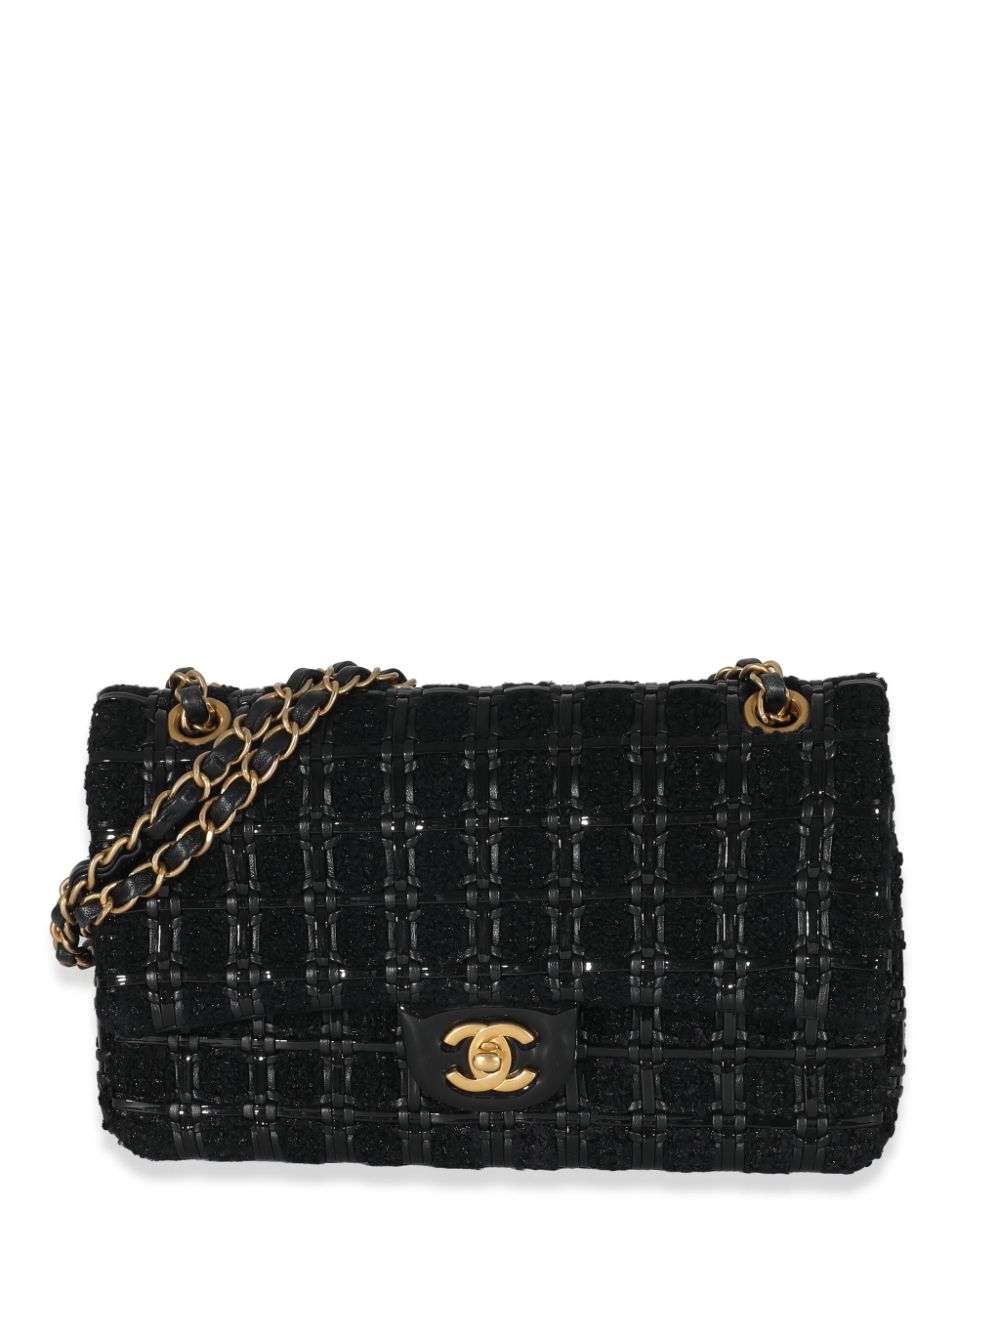 CHANEL Pre-Owned Tweed Double Flap Shoulder Bag - Farfetch